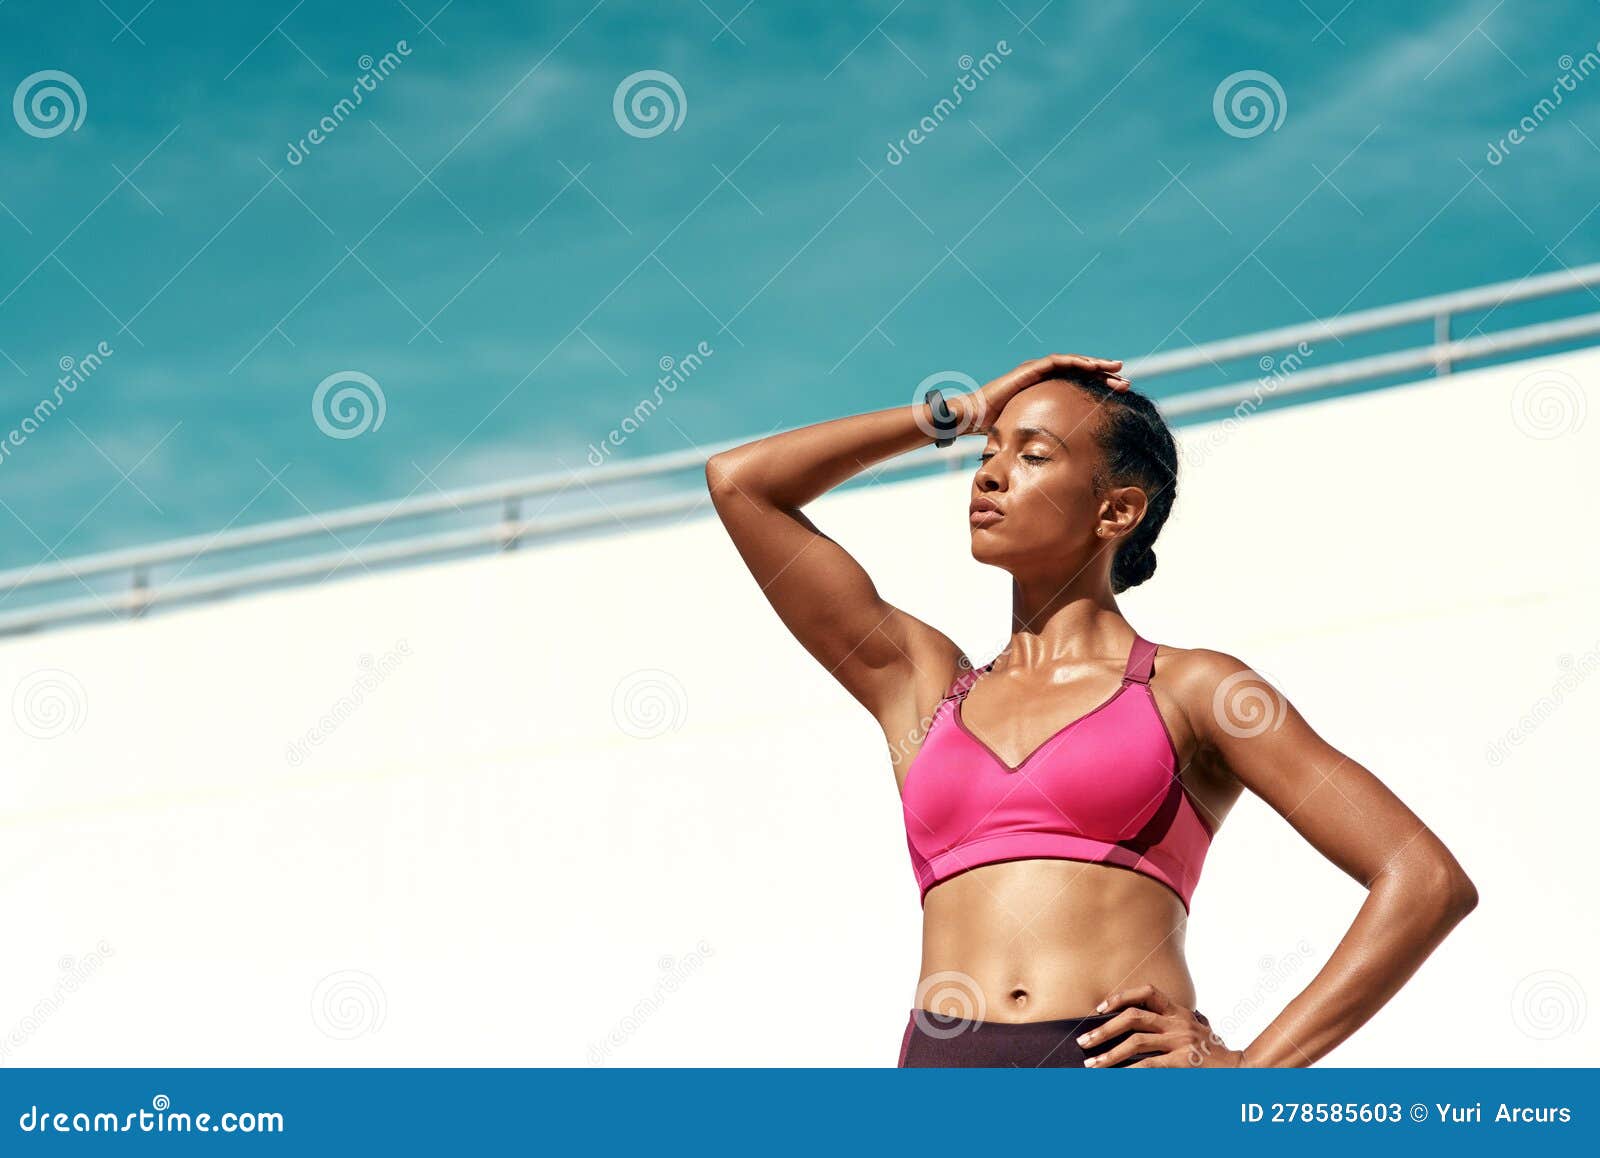 Sunshine, Fitness and Relax, Woman with Mockup on Blue Sky at Outdoor Gym  for Health and Wellness with Space. Workout Stock Image - Image of outdoor,  runner: 278585603